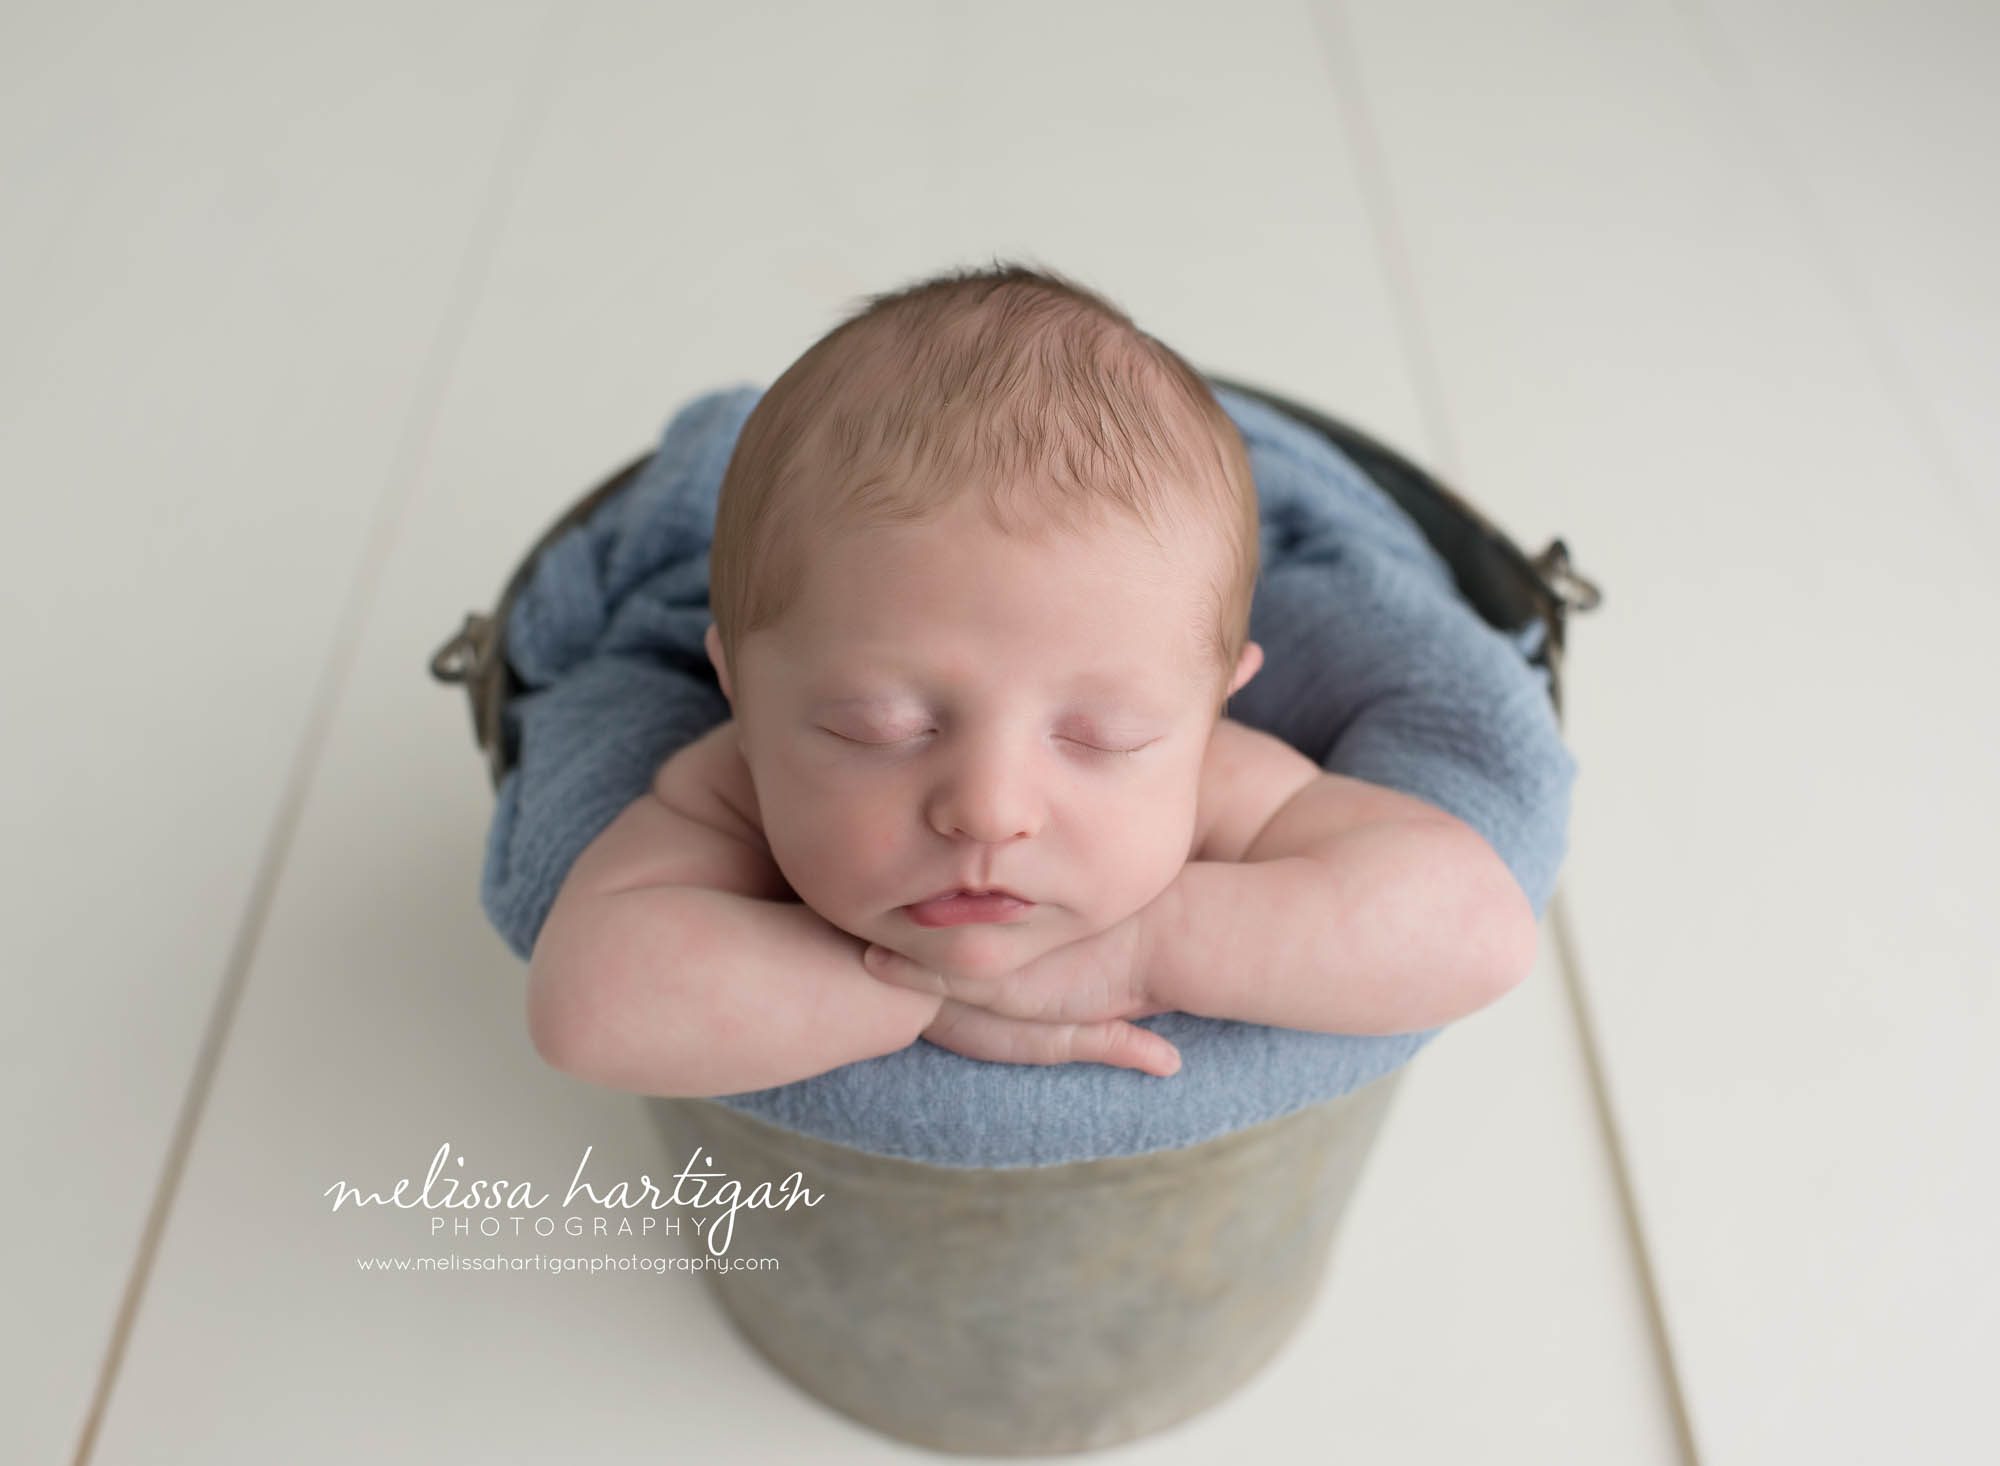 Melissa Hartigan Photography Coventry CT Newborn & Maternity Photographer Coventry CT Maternity Newborn Session Chase sleeping in metal bucket with blue blanket head on hands